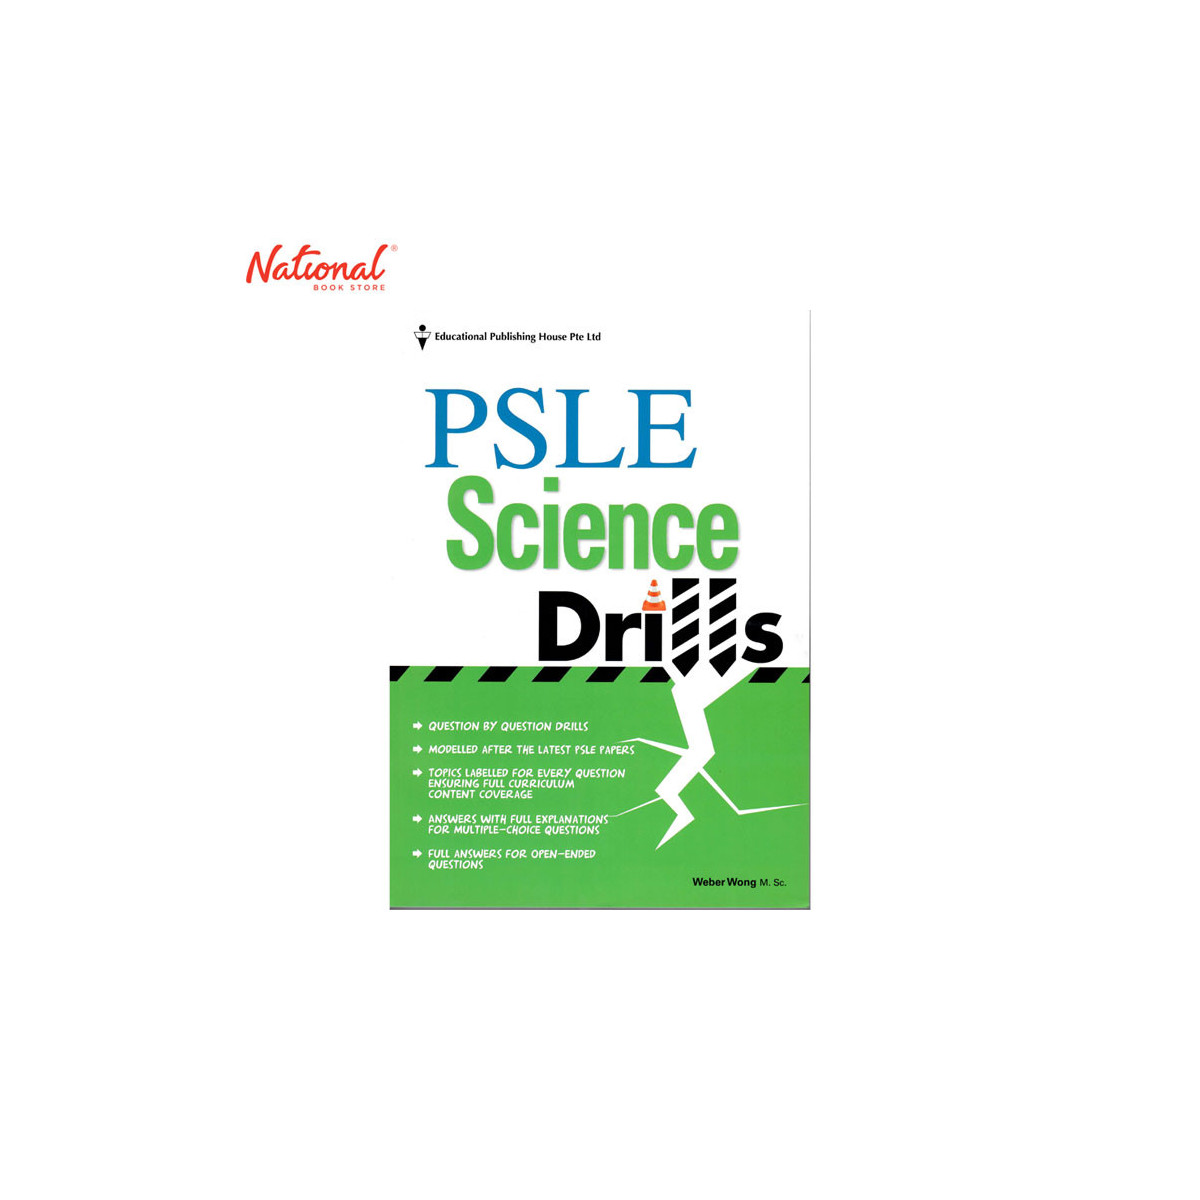 PSLE SCIENCE DRILLS